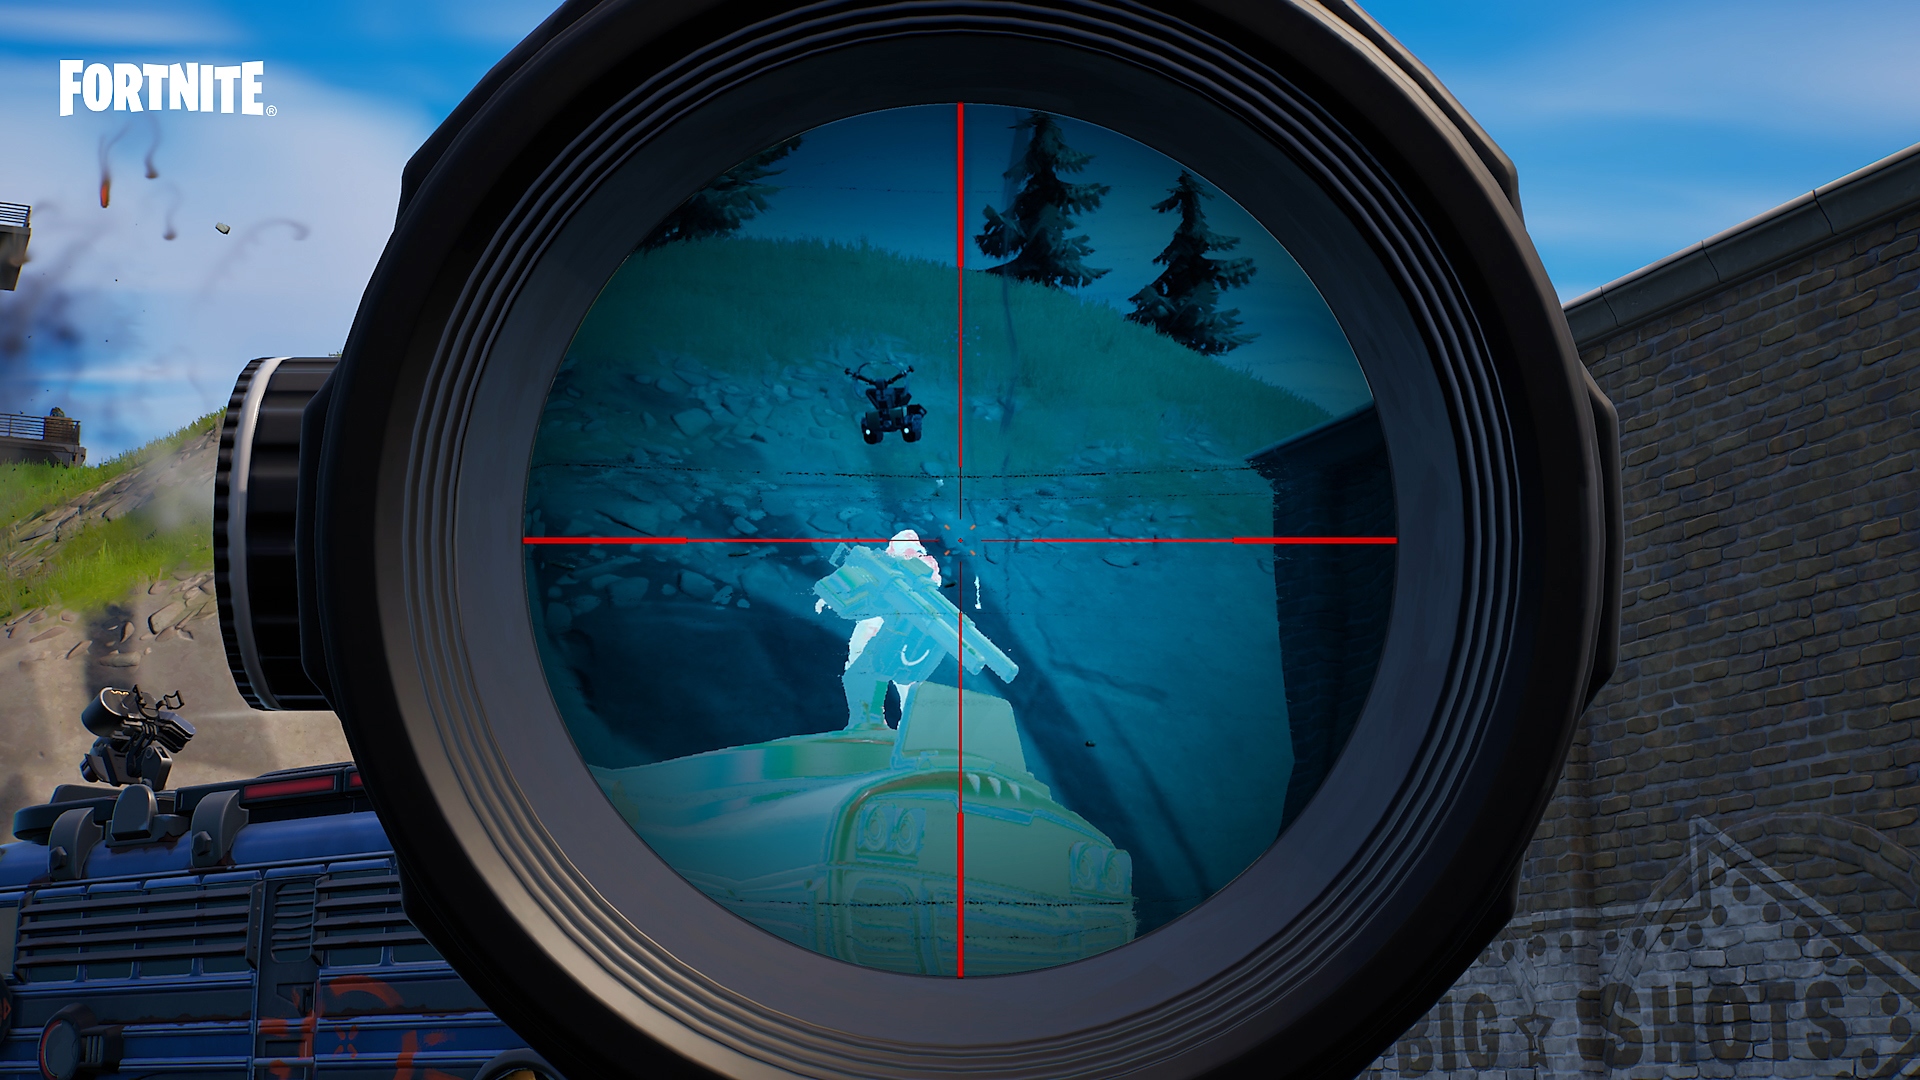 Fortnite zero build mode - character aiming at a target